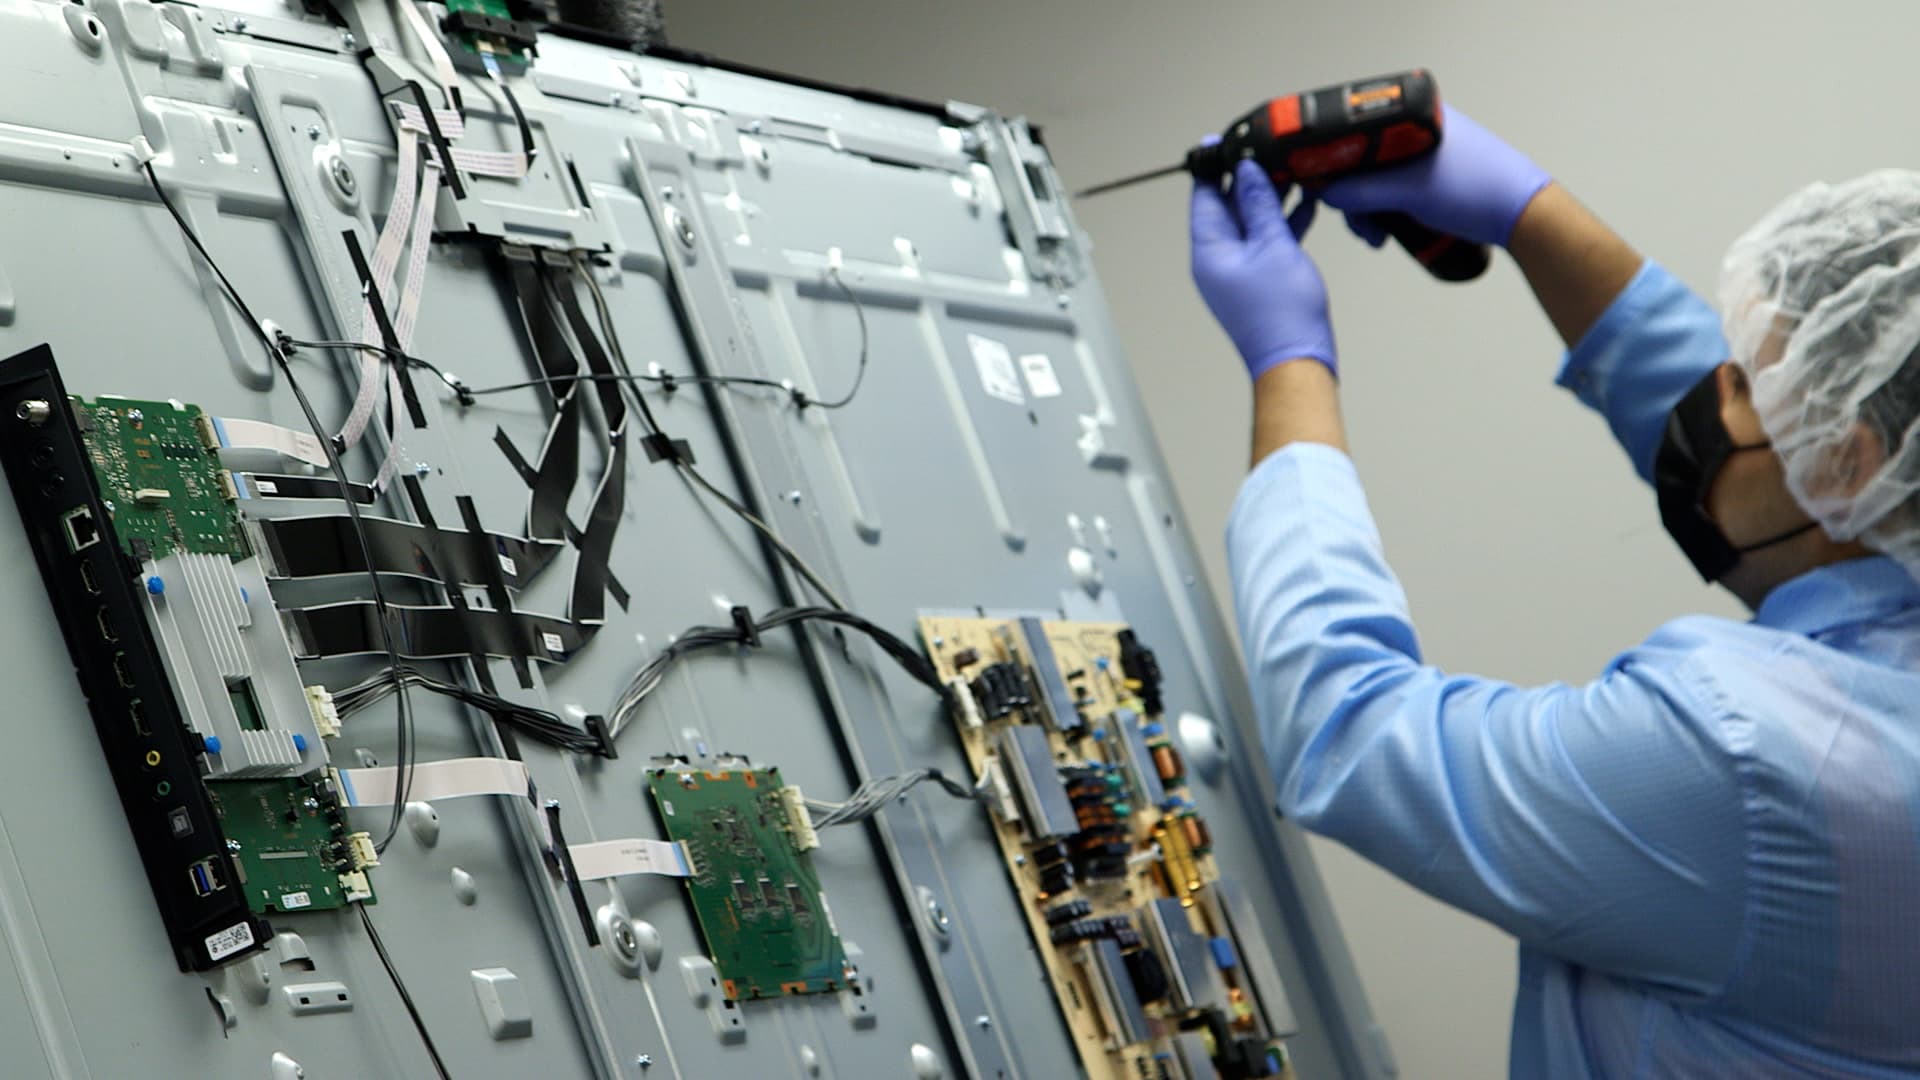 A Liquidity Services employee refurbishes a TV at a warehouse in Garland, Texas, on January 31, 2022.